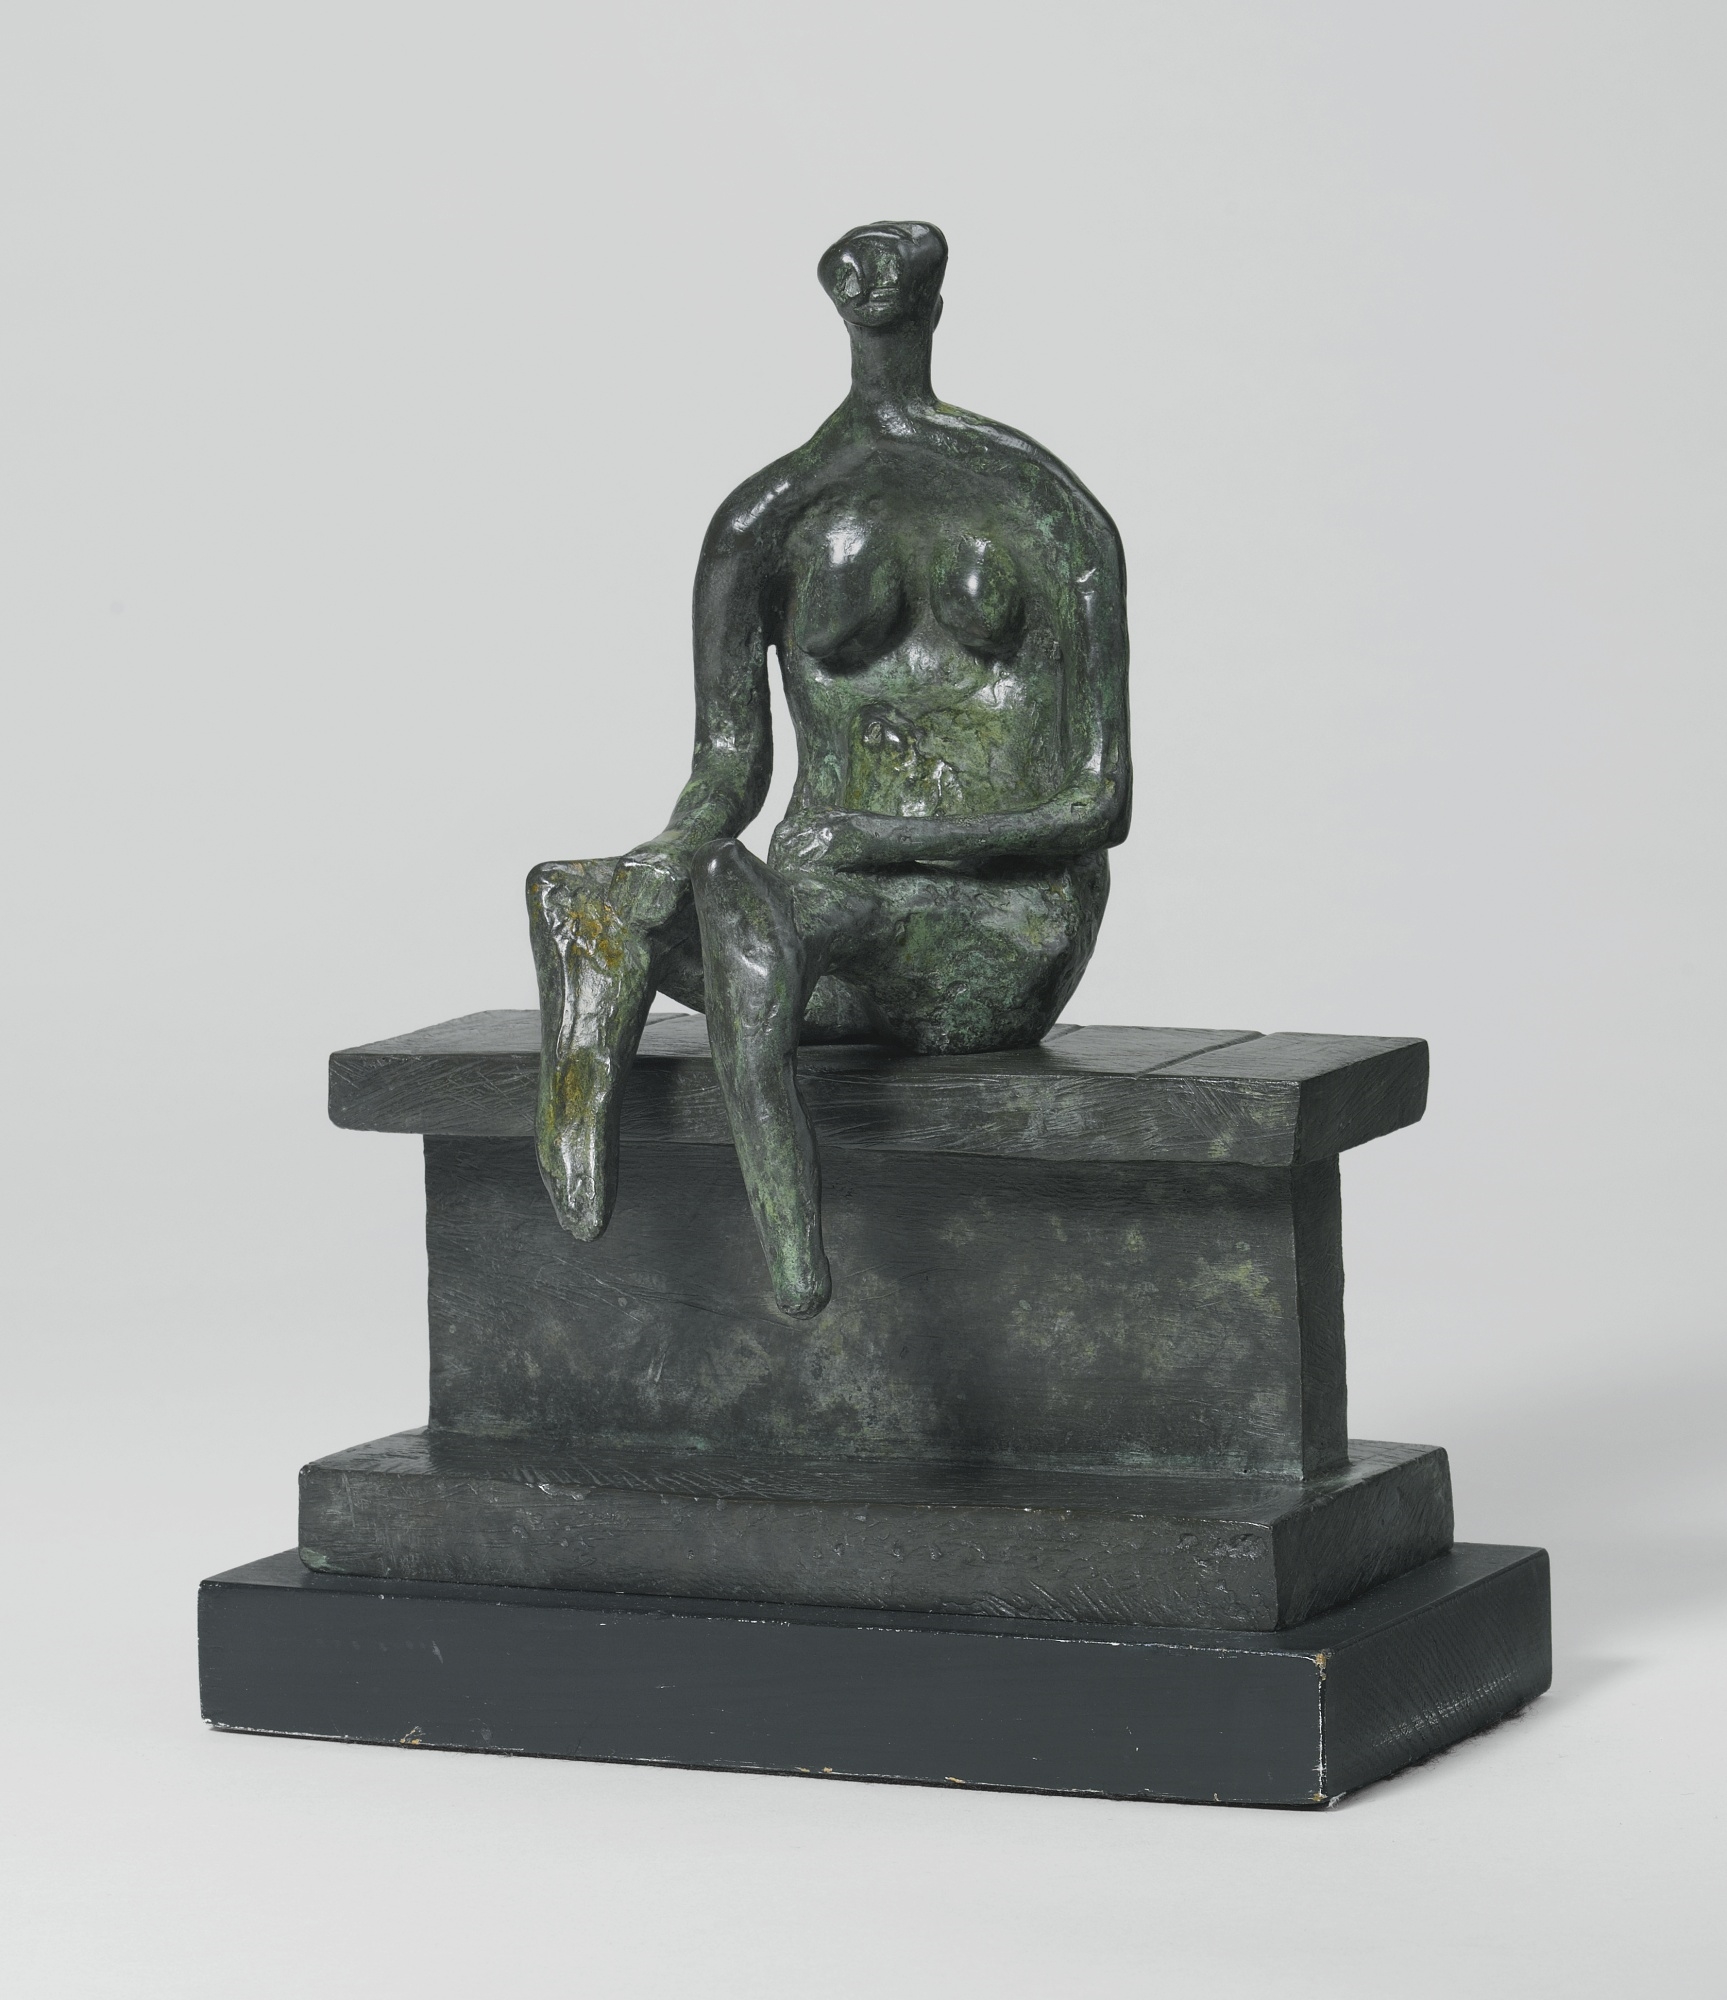 SEATED FIGURE ON A LEDGE by Henry Moore, 1957